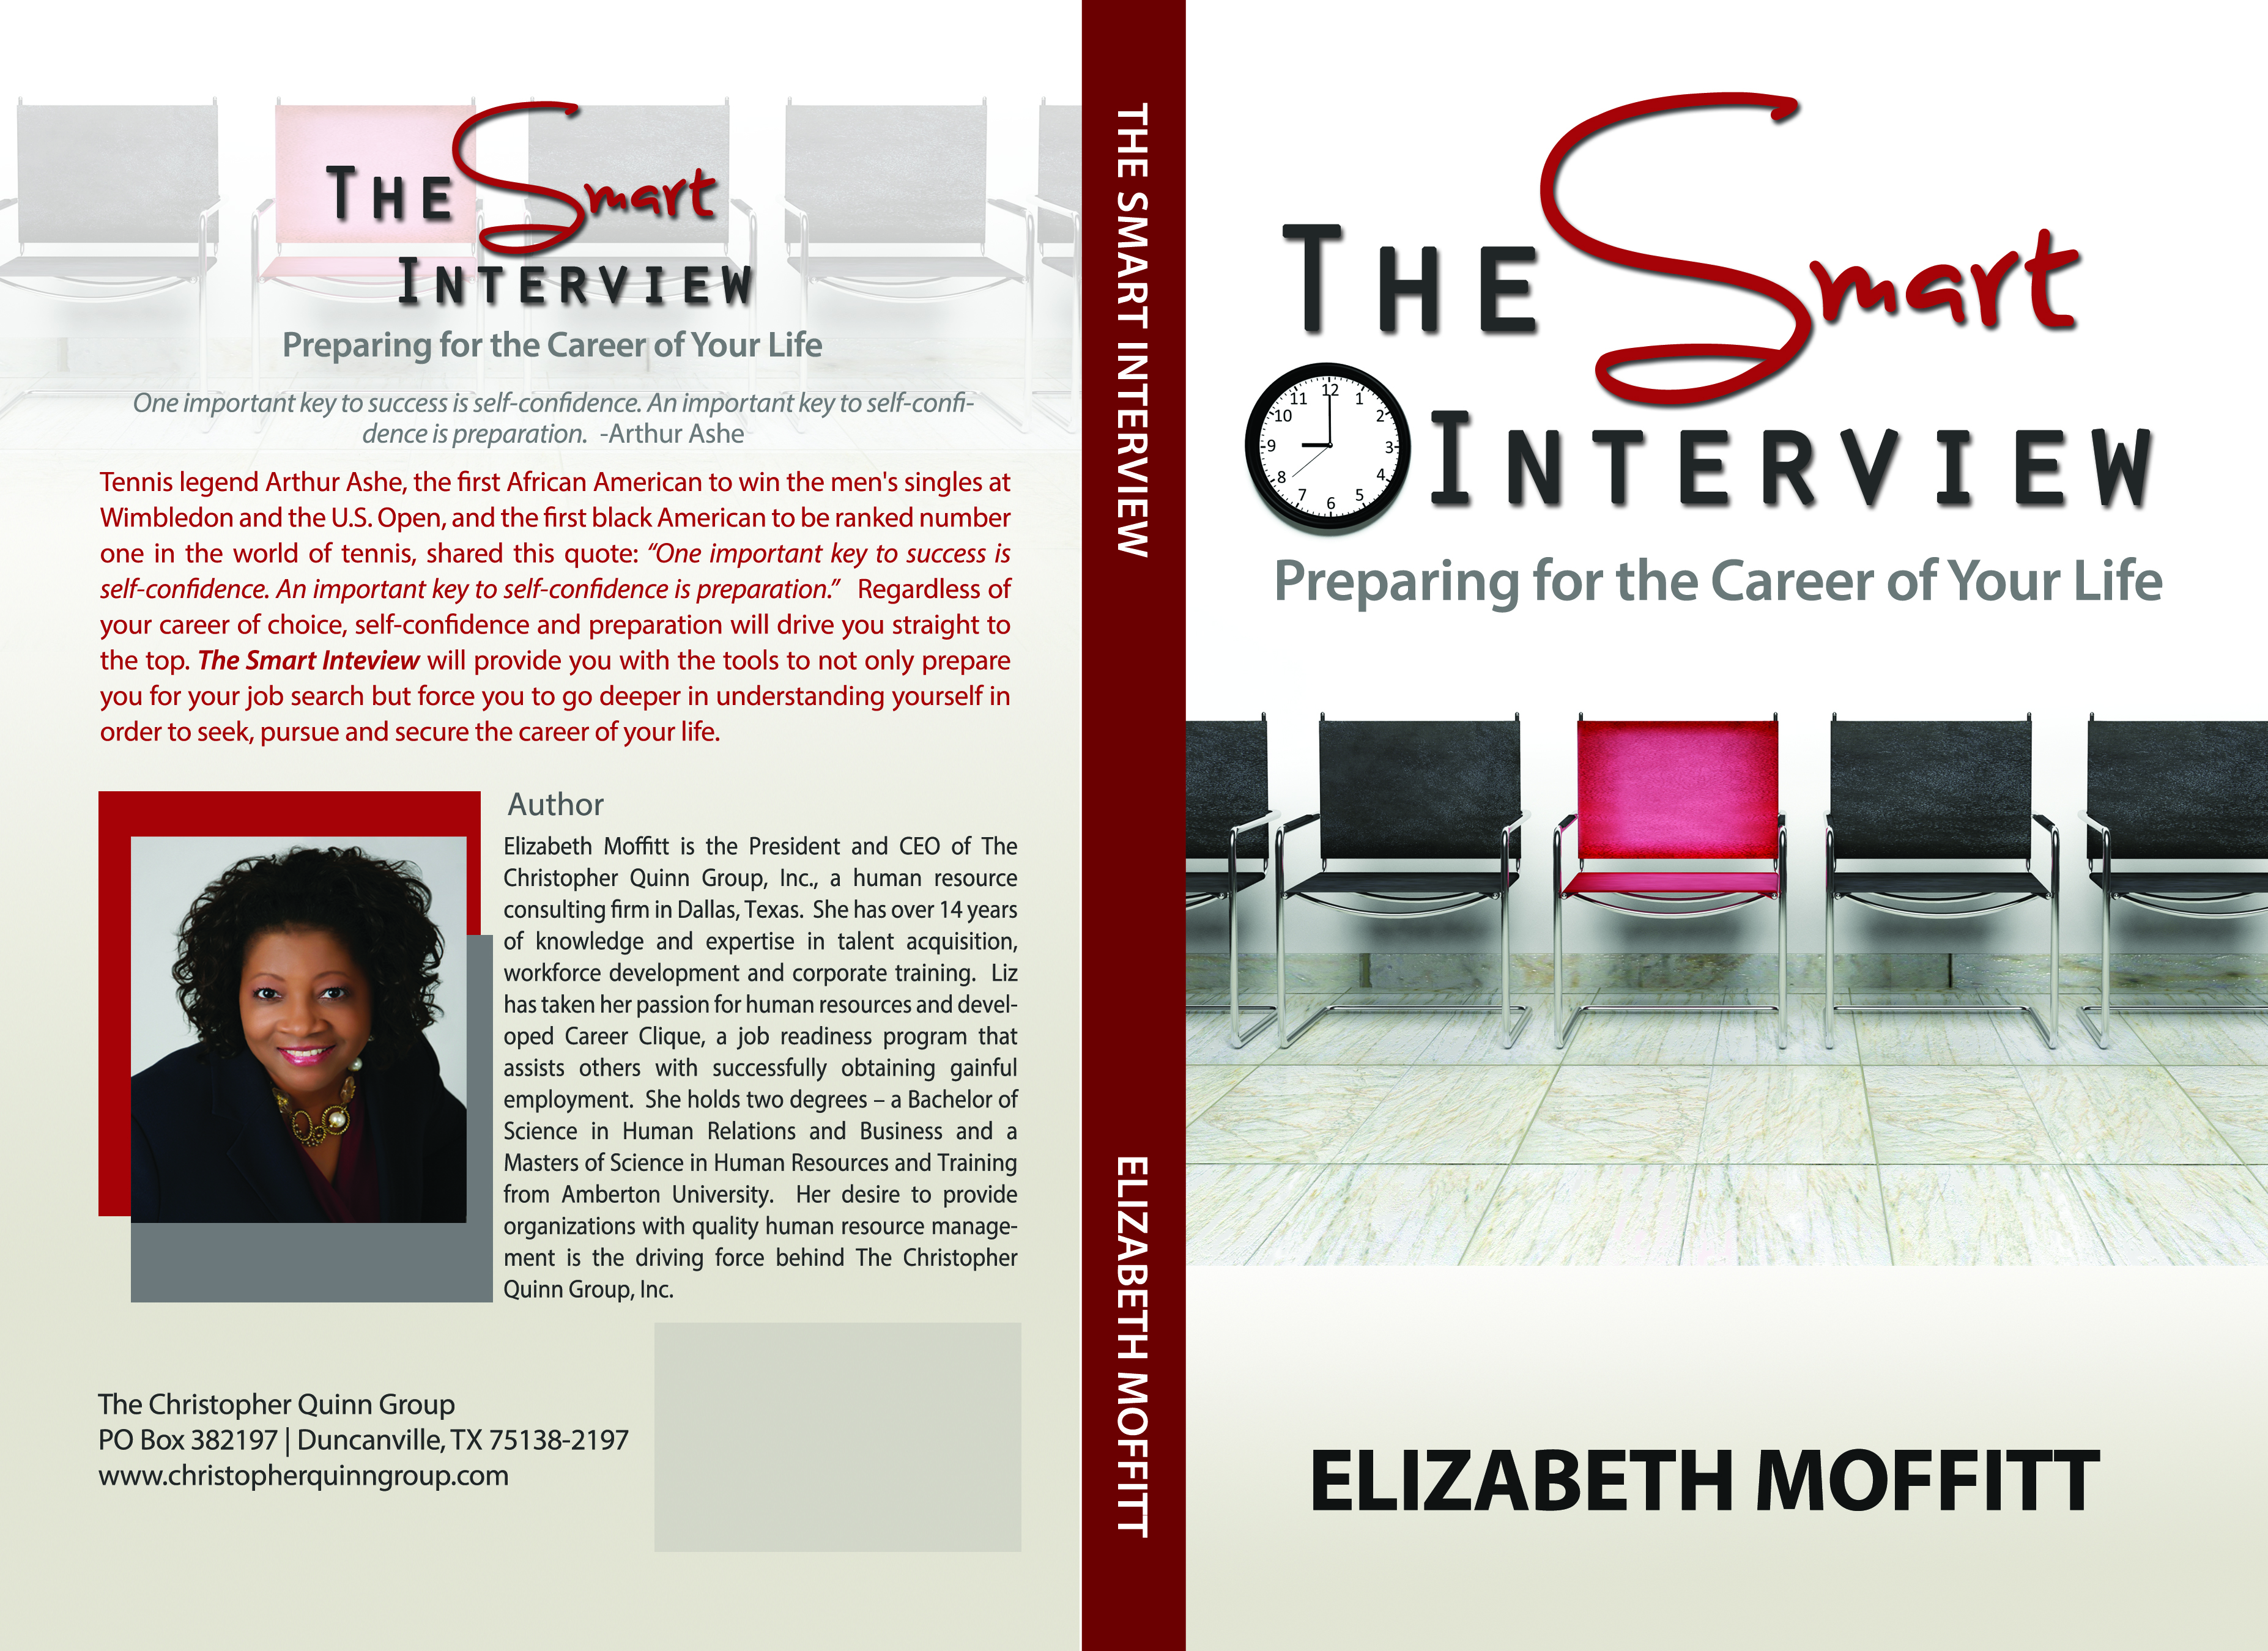 Get your copy of The Smart Interview Today